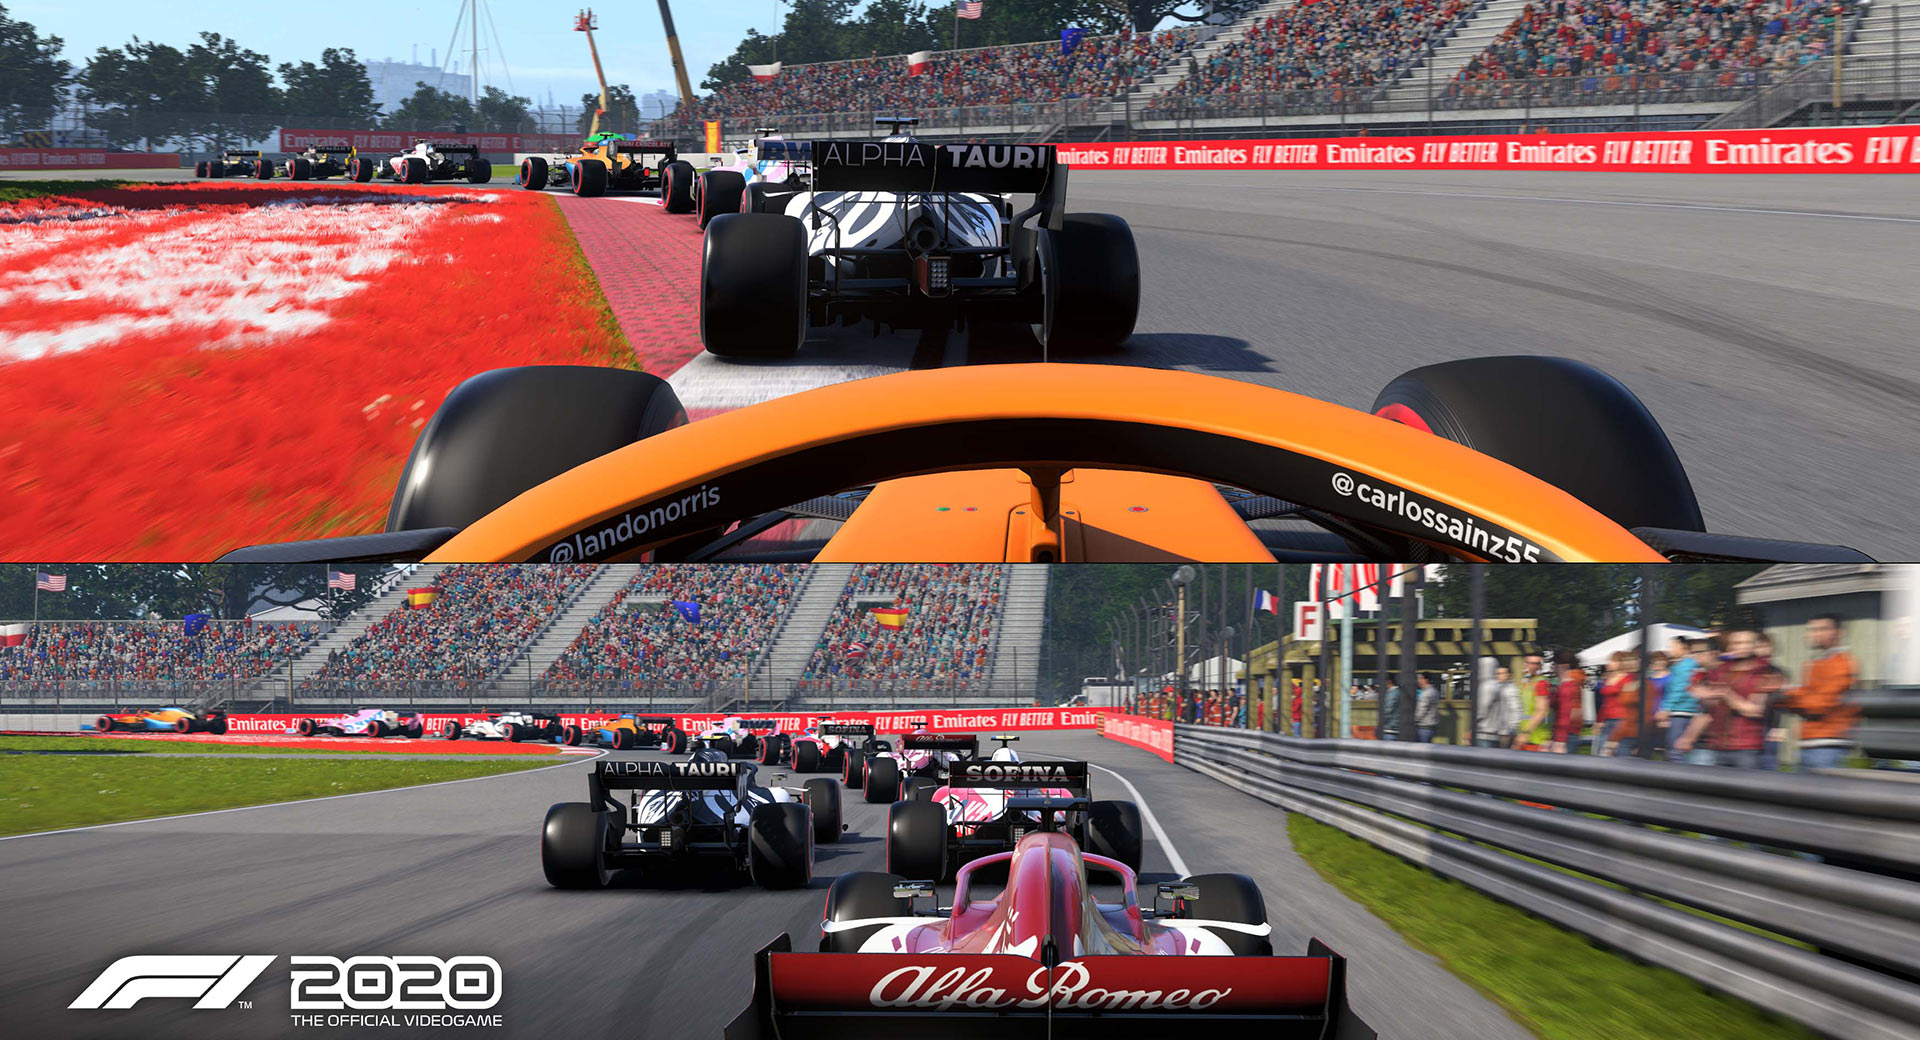 Review: F1 2020 Is A Great Game For Experts And Amateurs - New Speed Cars